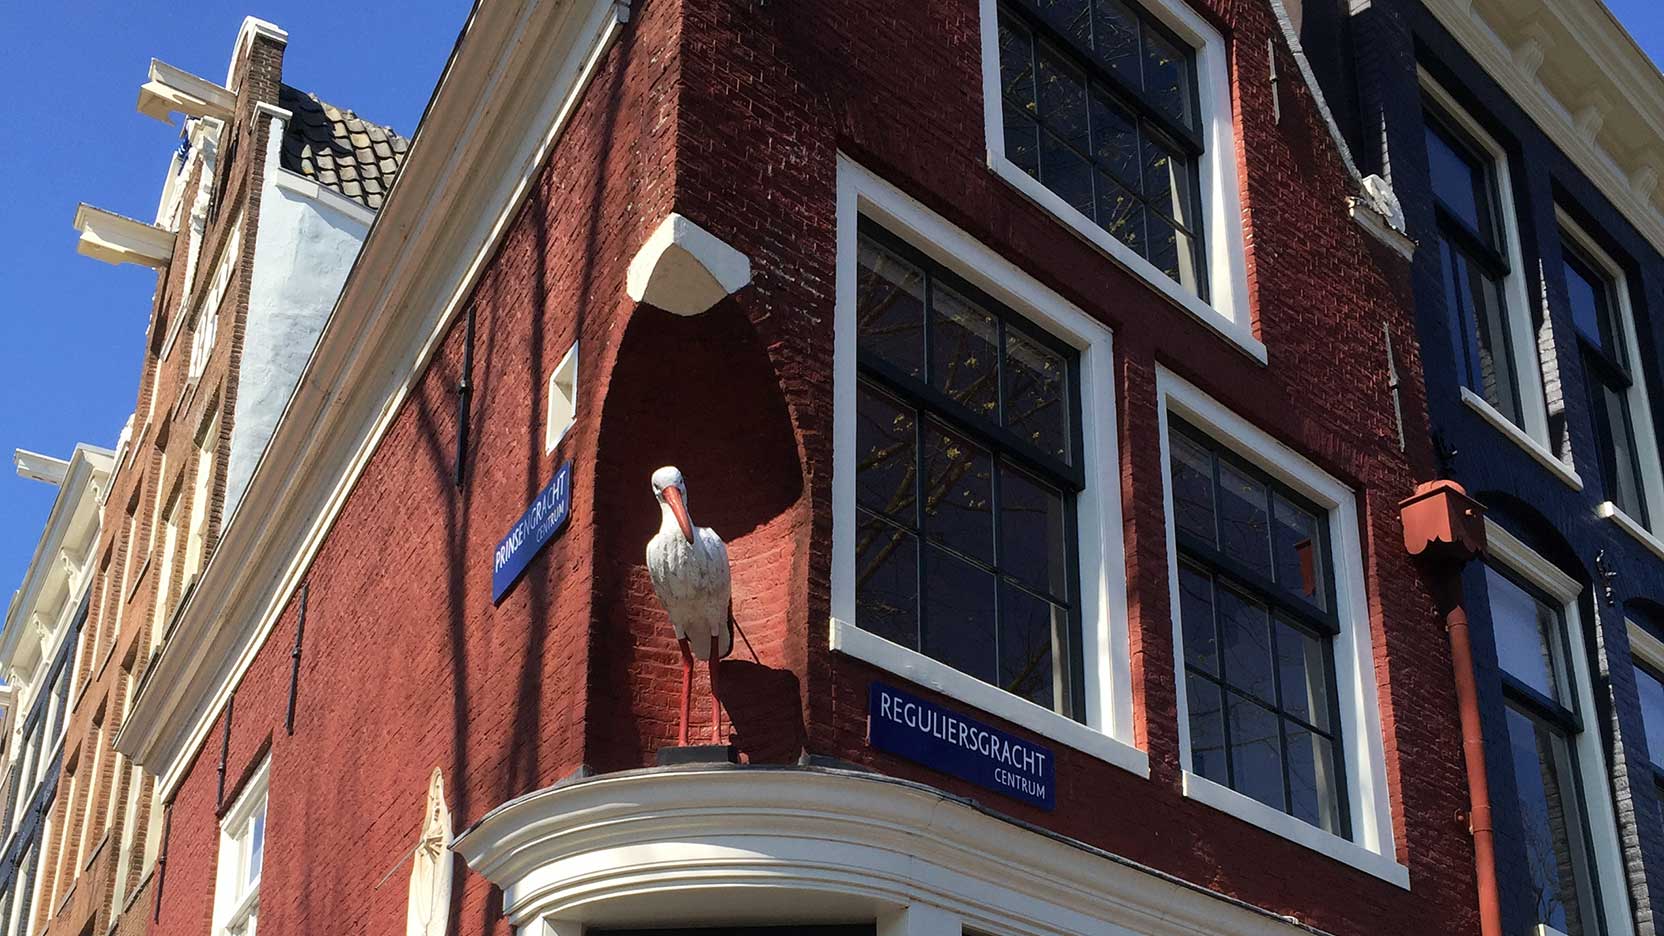 House with the Stork, Reguliersgracht, Amsterdam